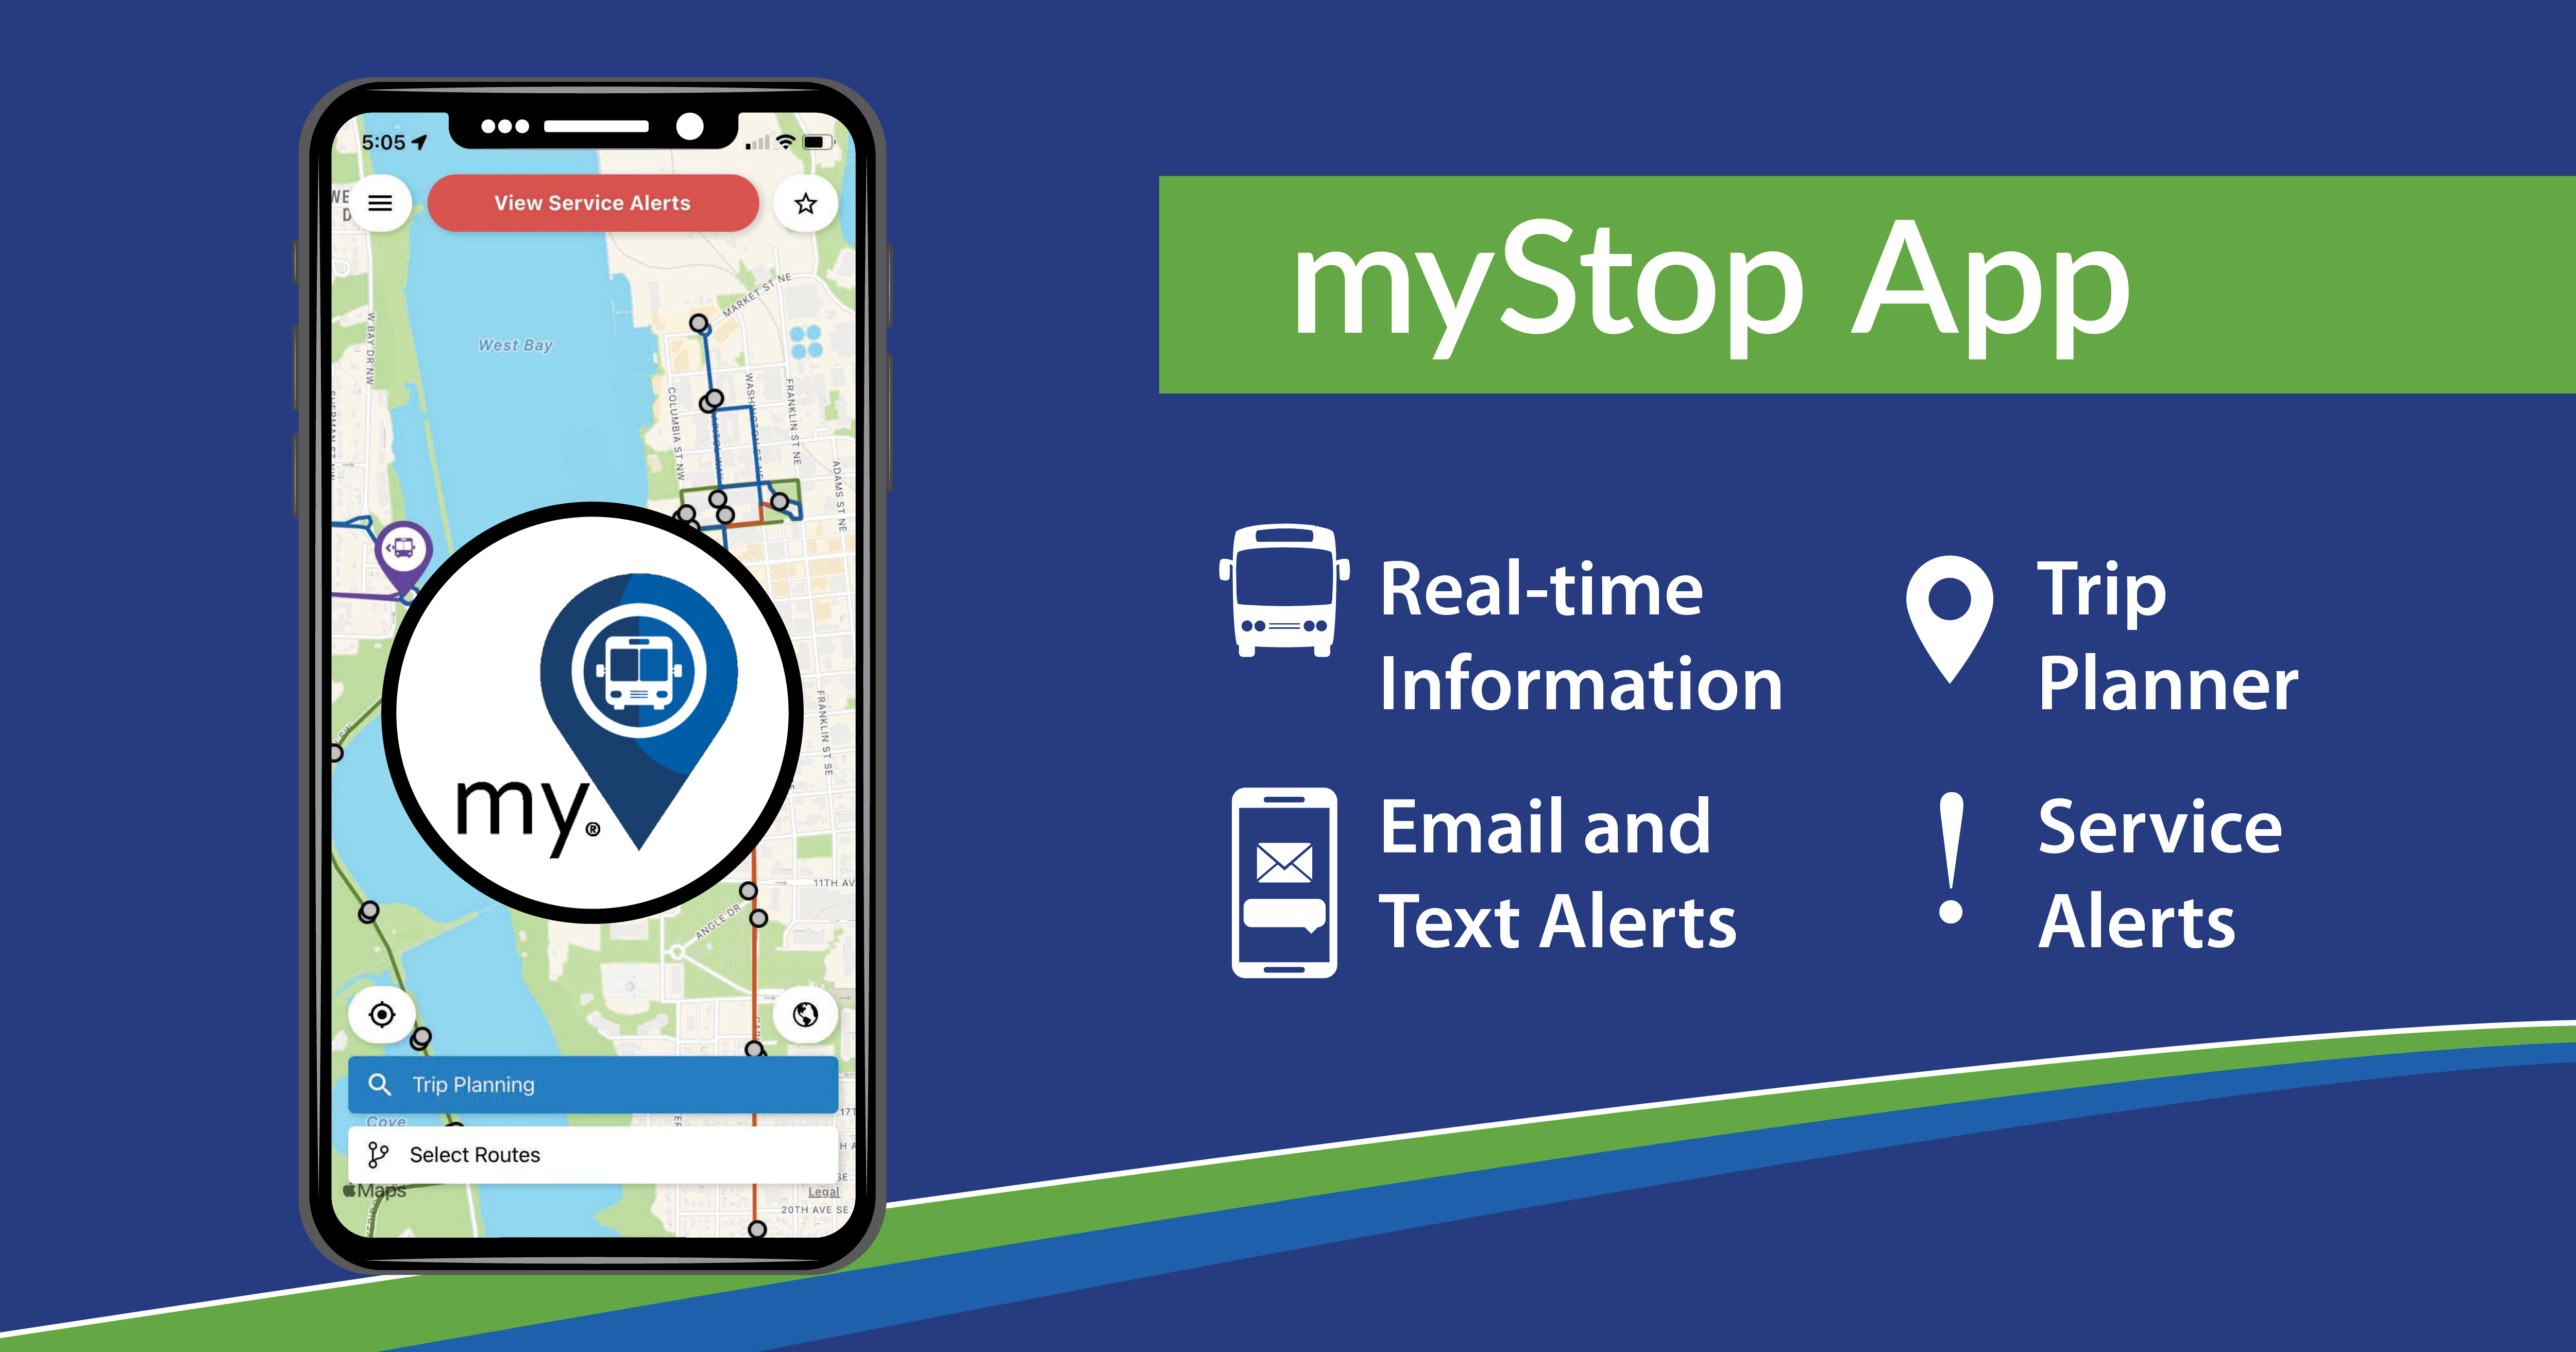 myStop app - Real-time Information Trip Planner Email and Text Alert Service Alerts